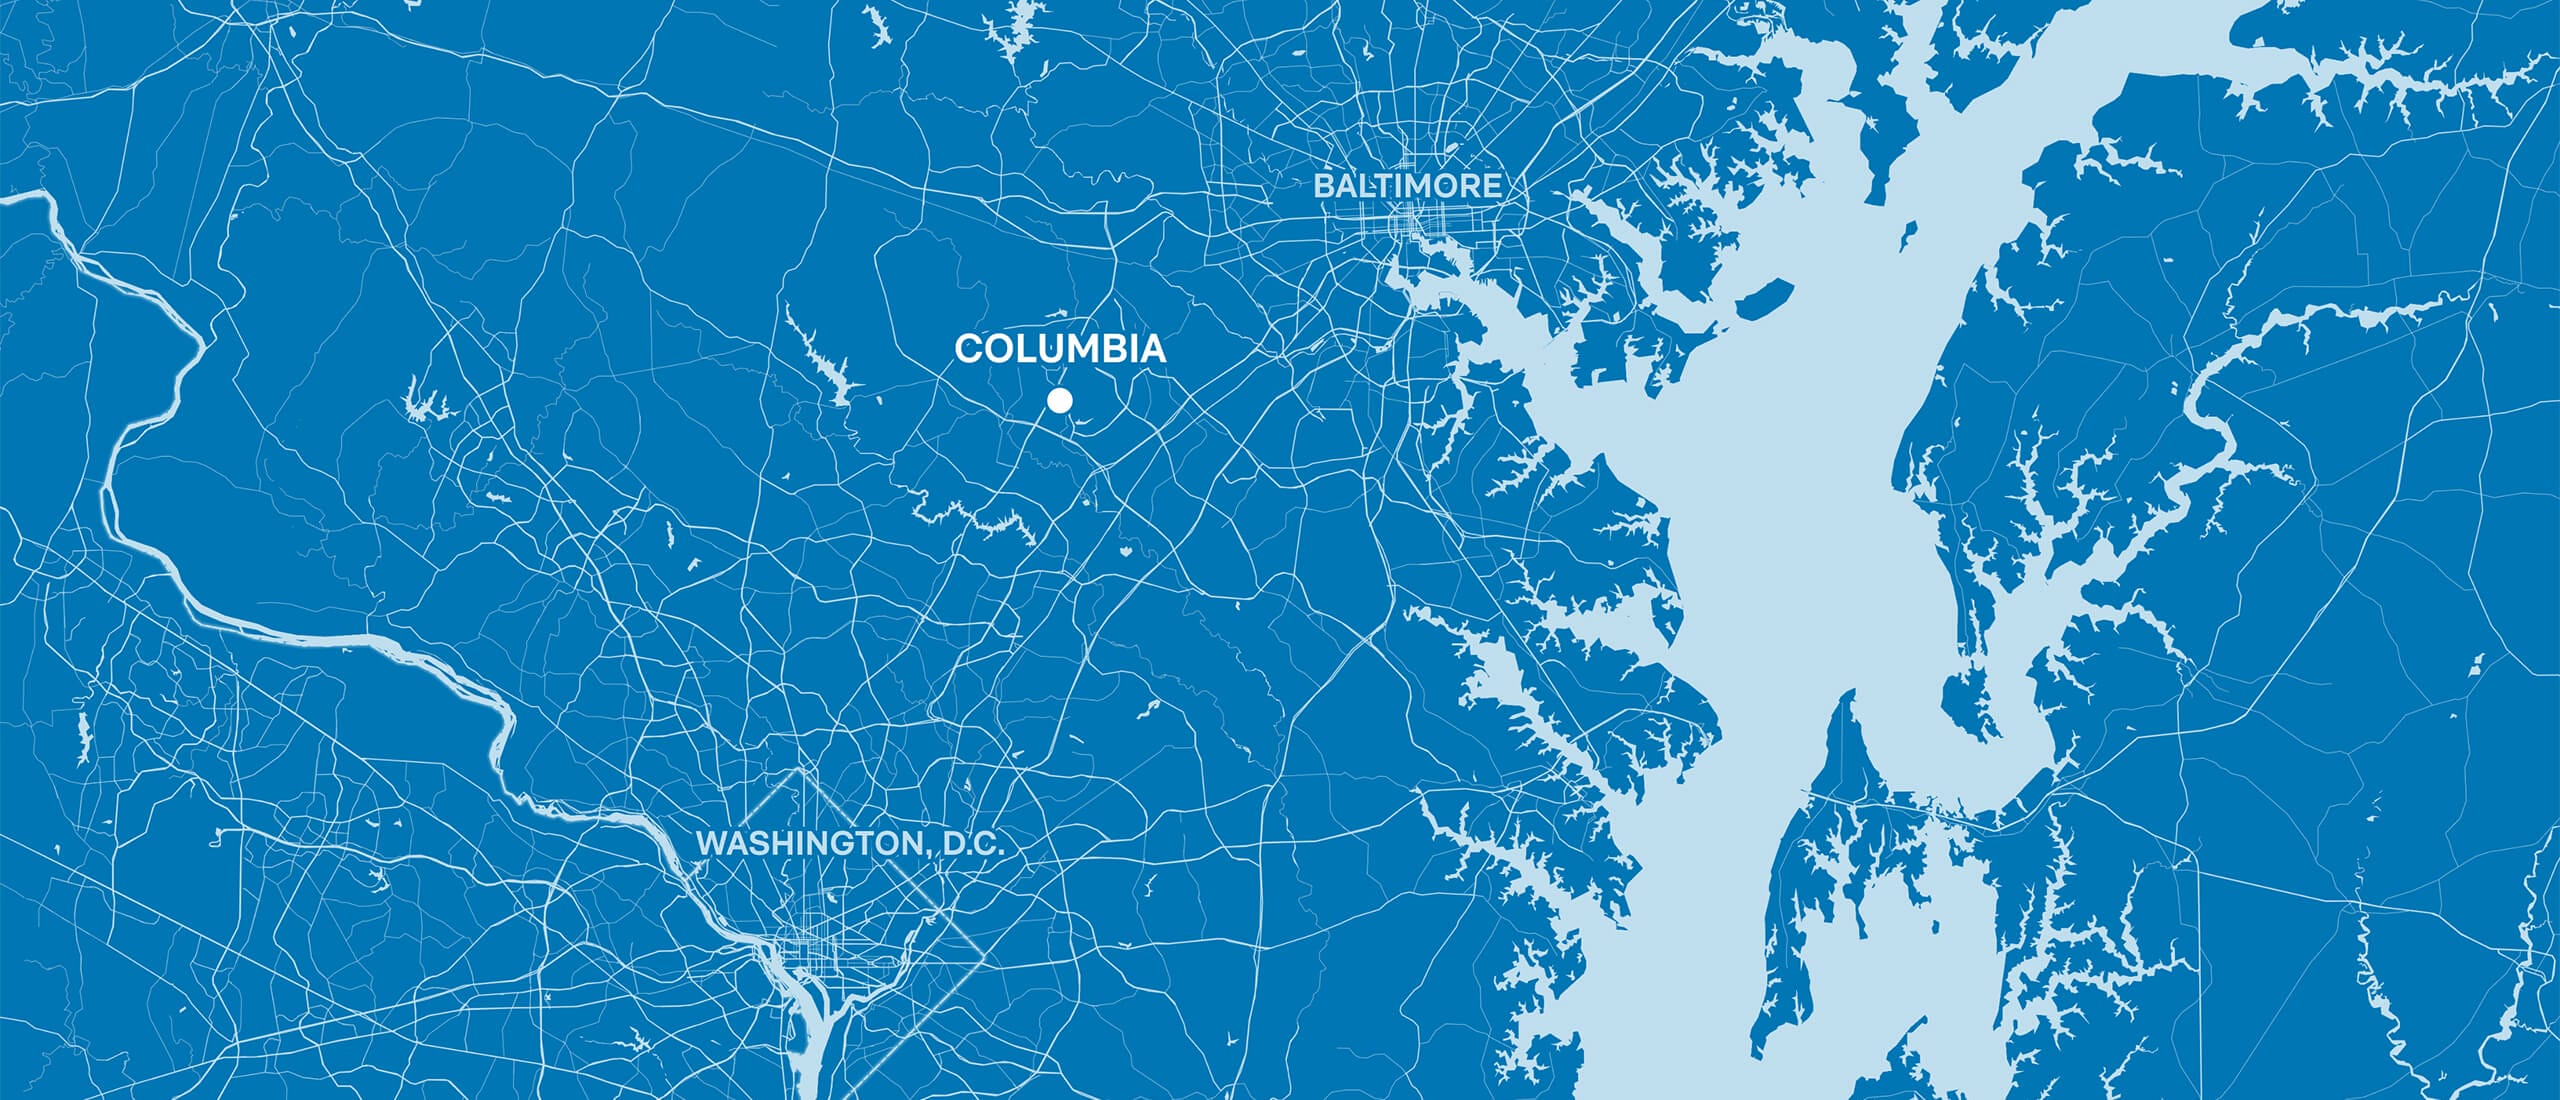 Regional map of Columbia shows close proximity and relative distance to Washington, D.C. and Baltimore.